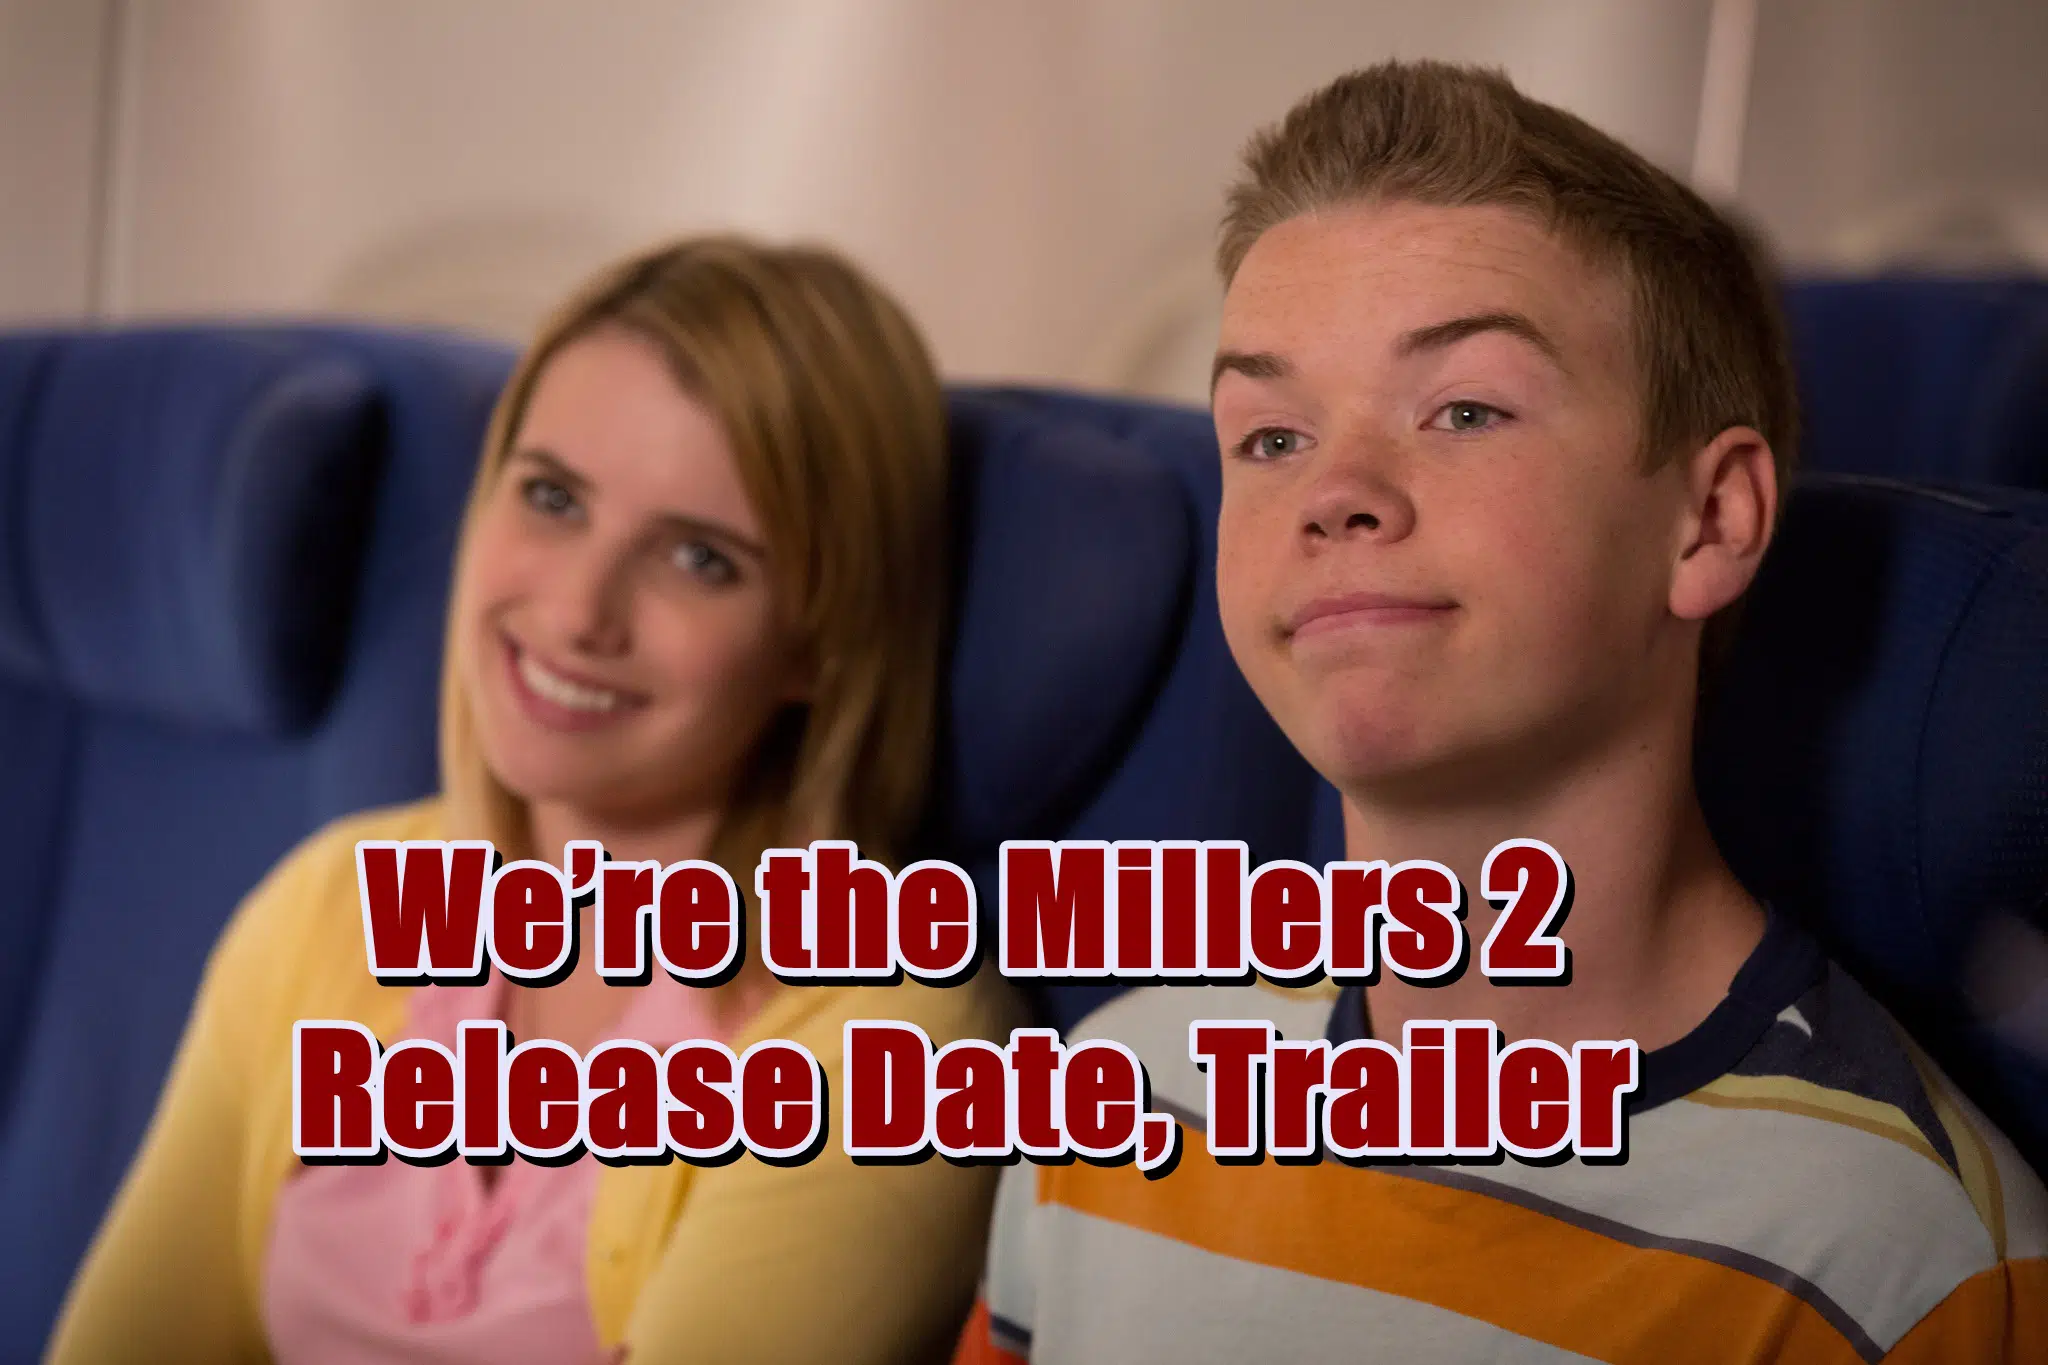 We are the Millers 2 Release Date, Trailer